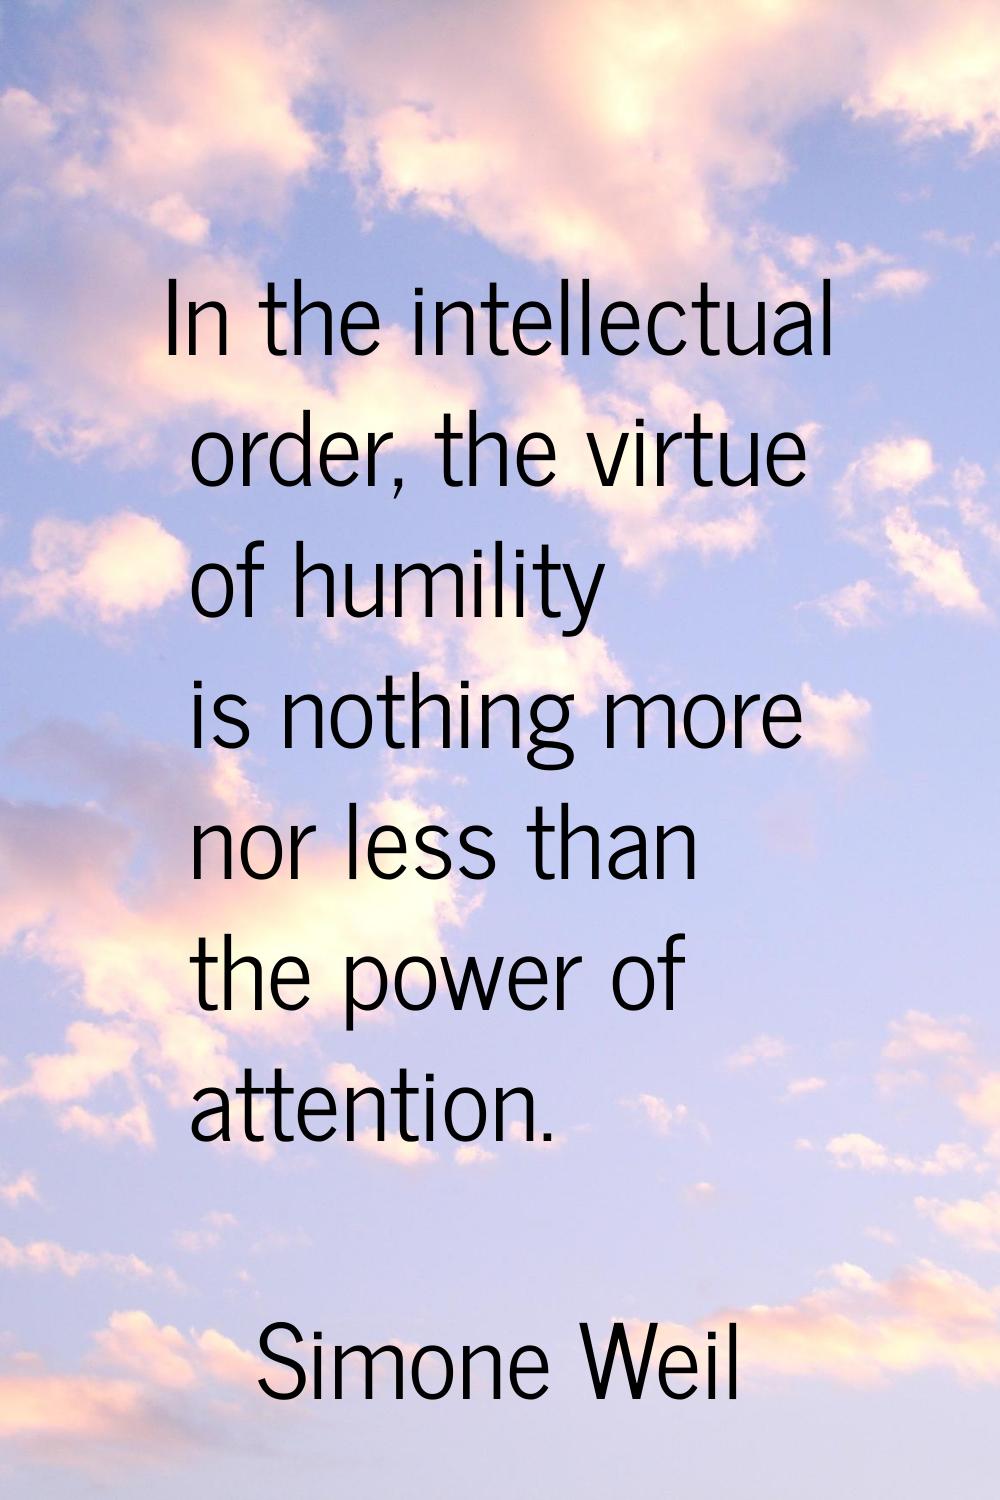 In the intellectual order, the virtue of humility is nothing more nor less than the power of attent